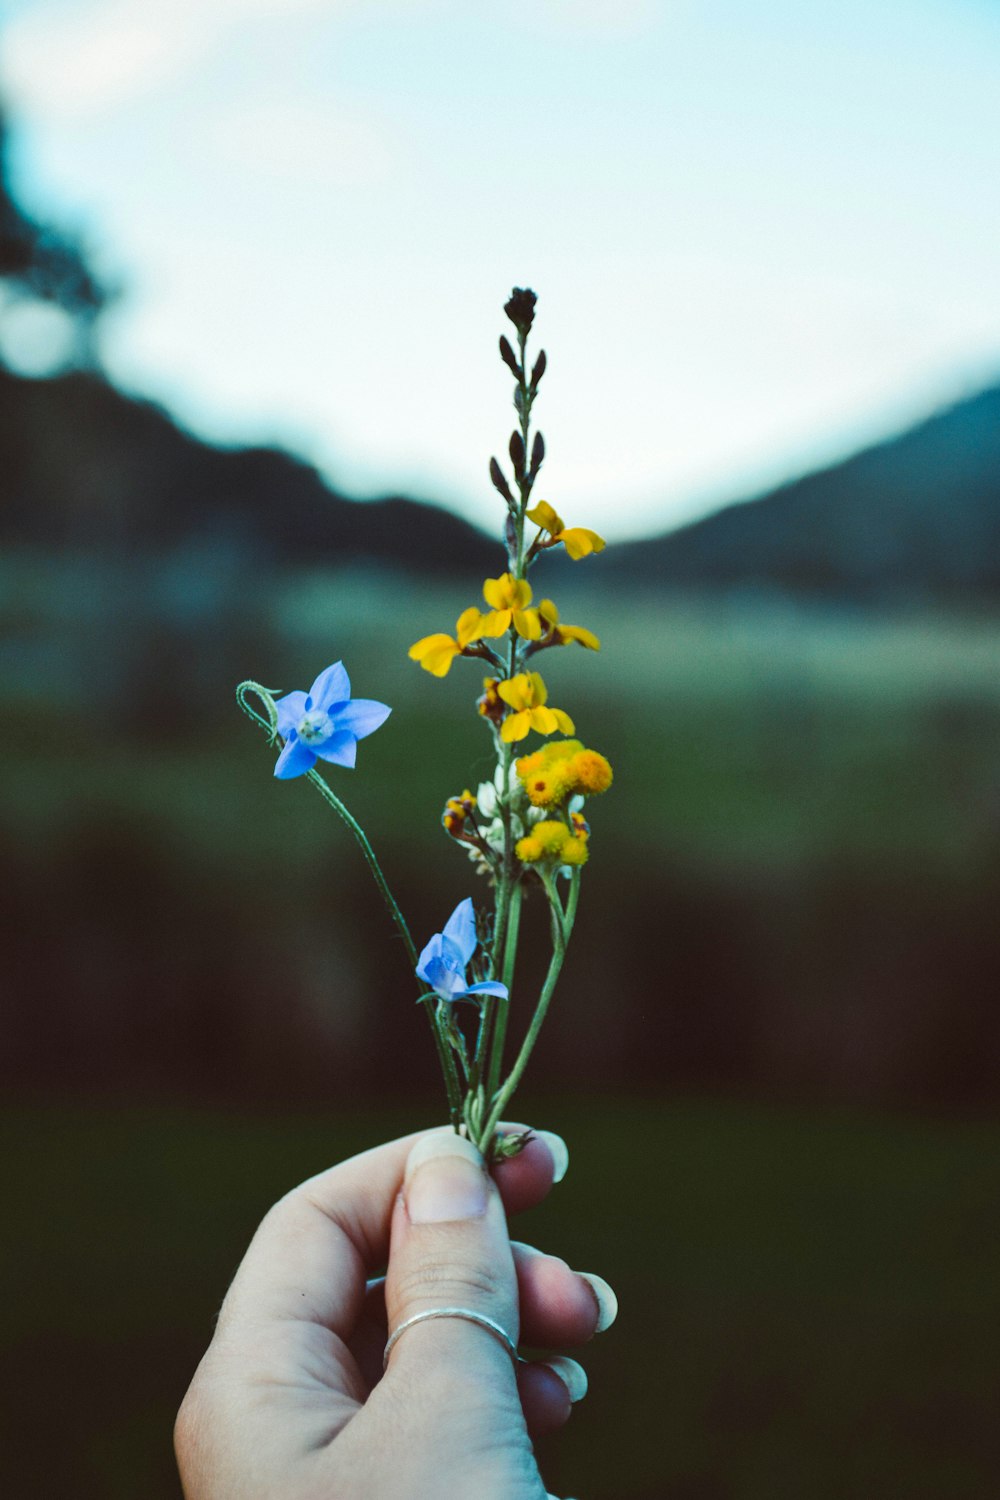 person holding yellow and blue petaled flowers